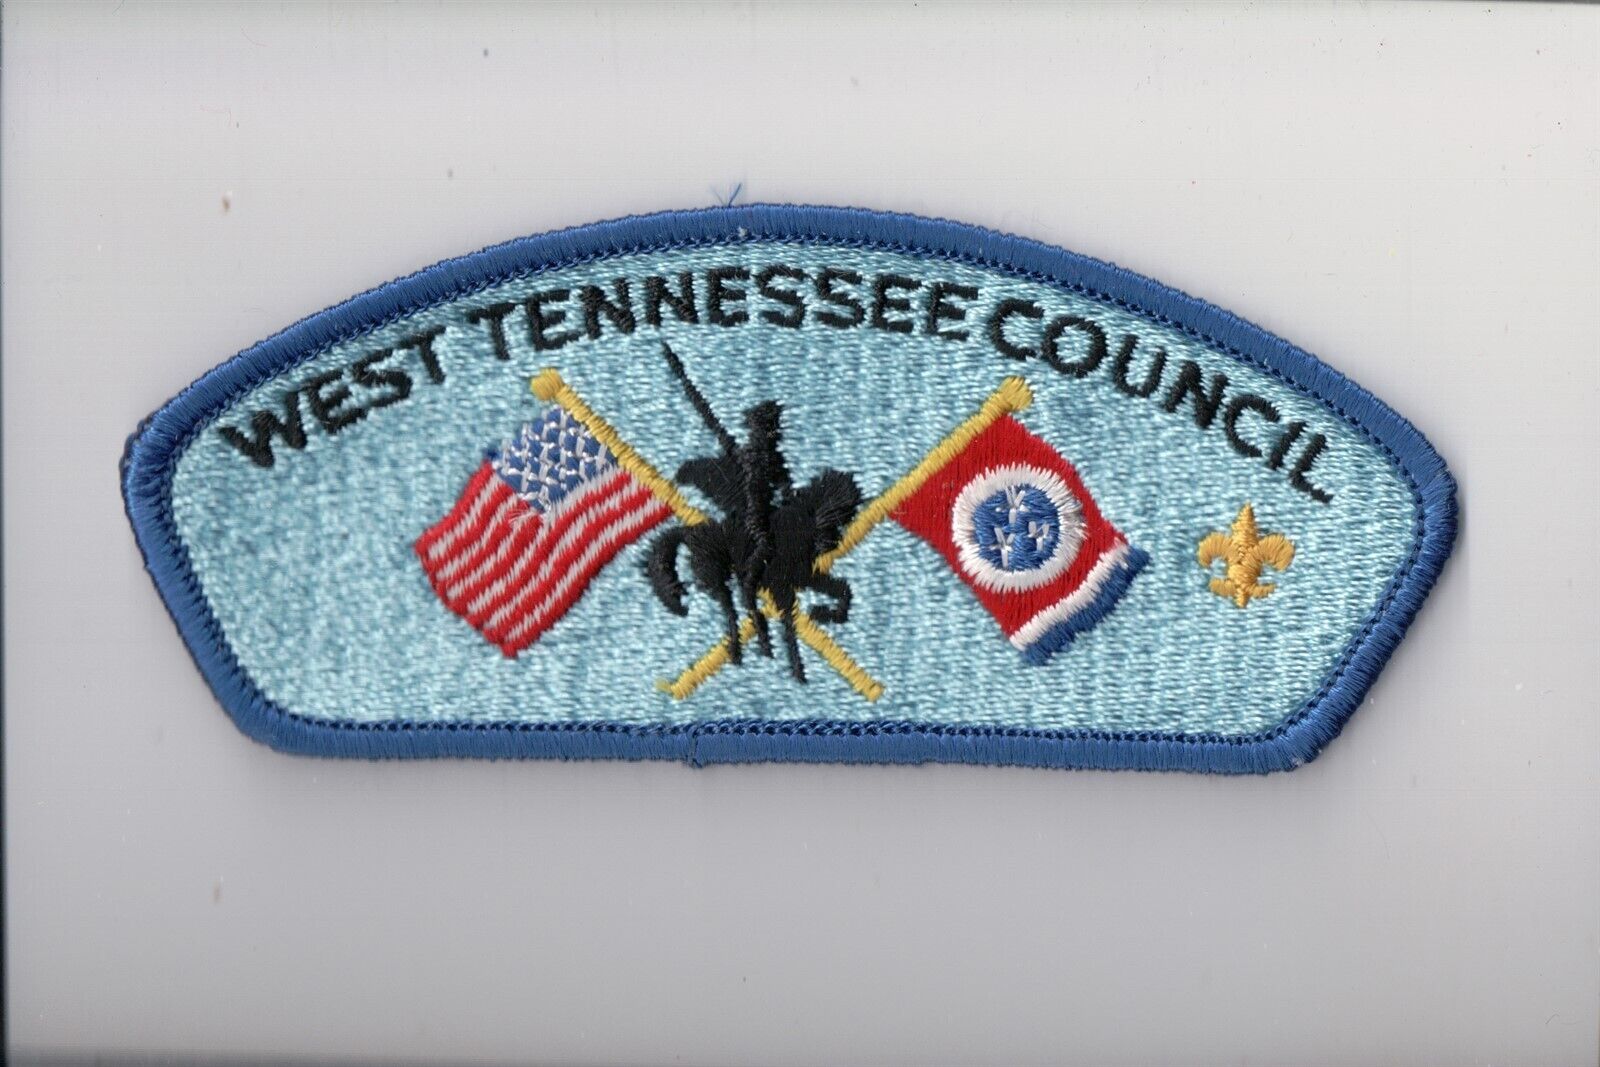 West Tennessee Council CSP (D)